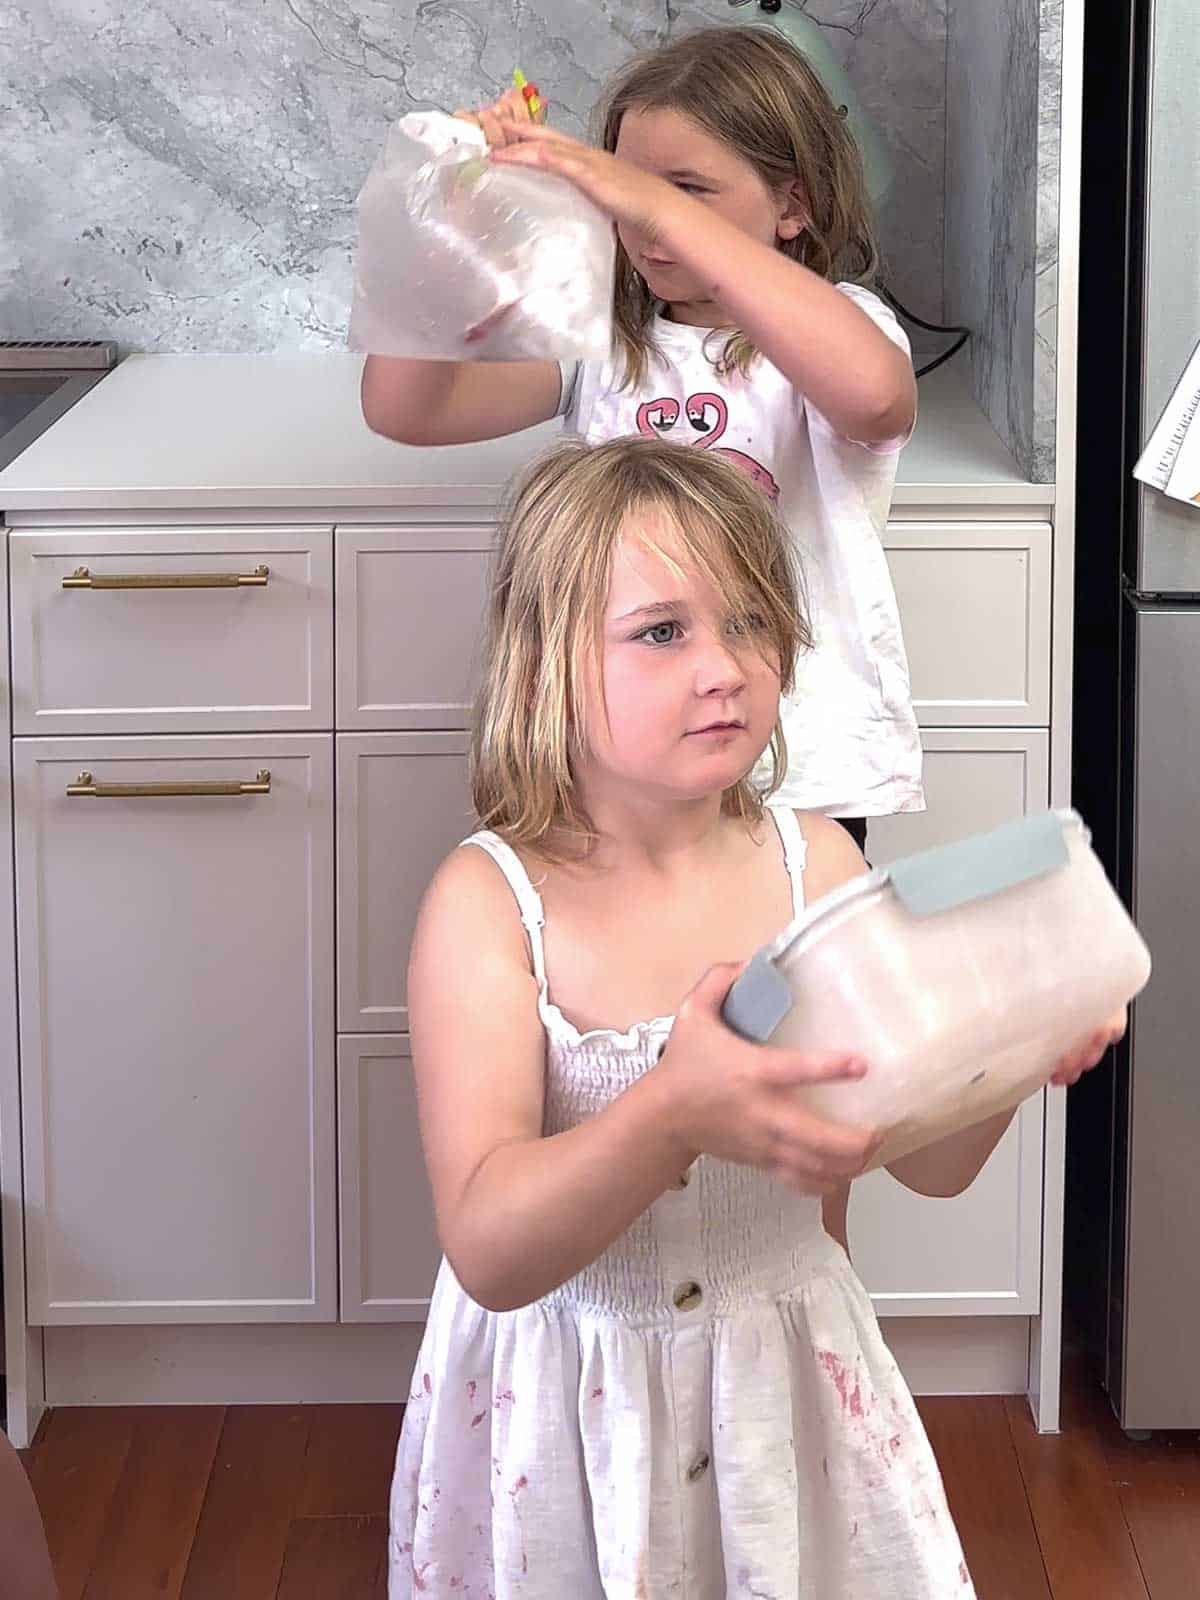 Two children in a kitchen shaking bags of ice to make ice cream